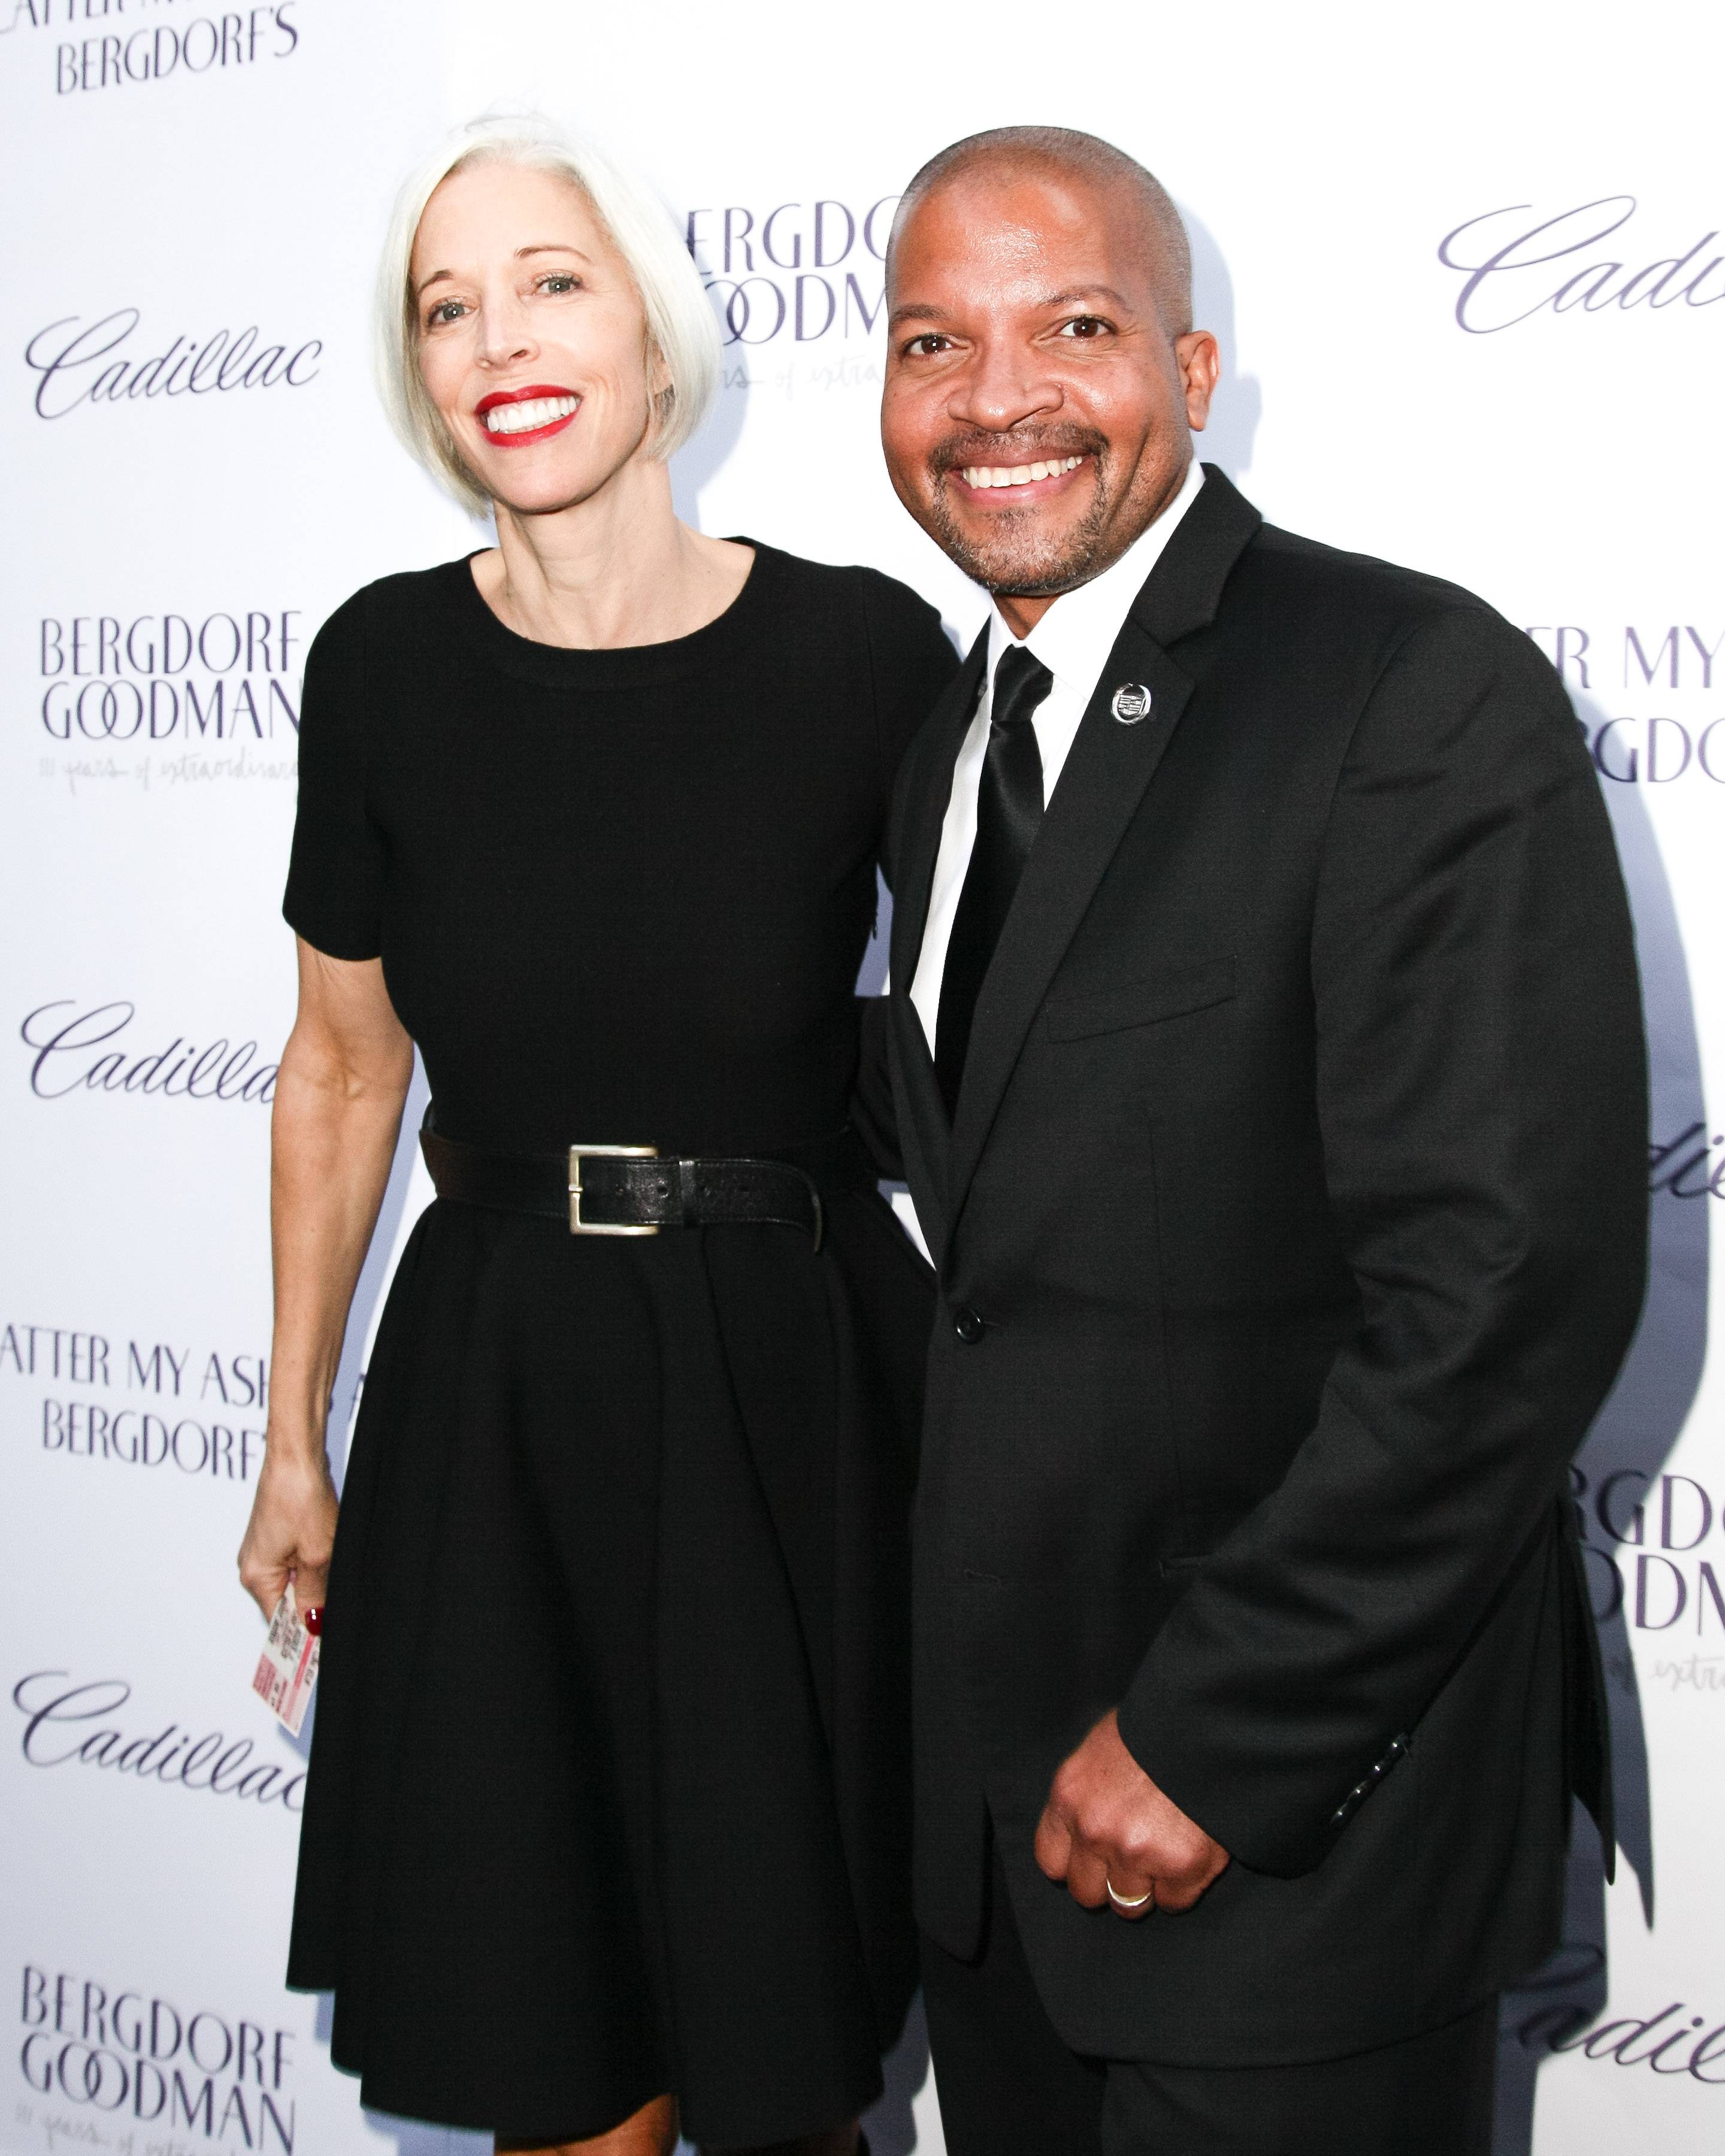 BERGDORF GOODMAN and CADILLAC host a special screening of 